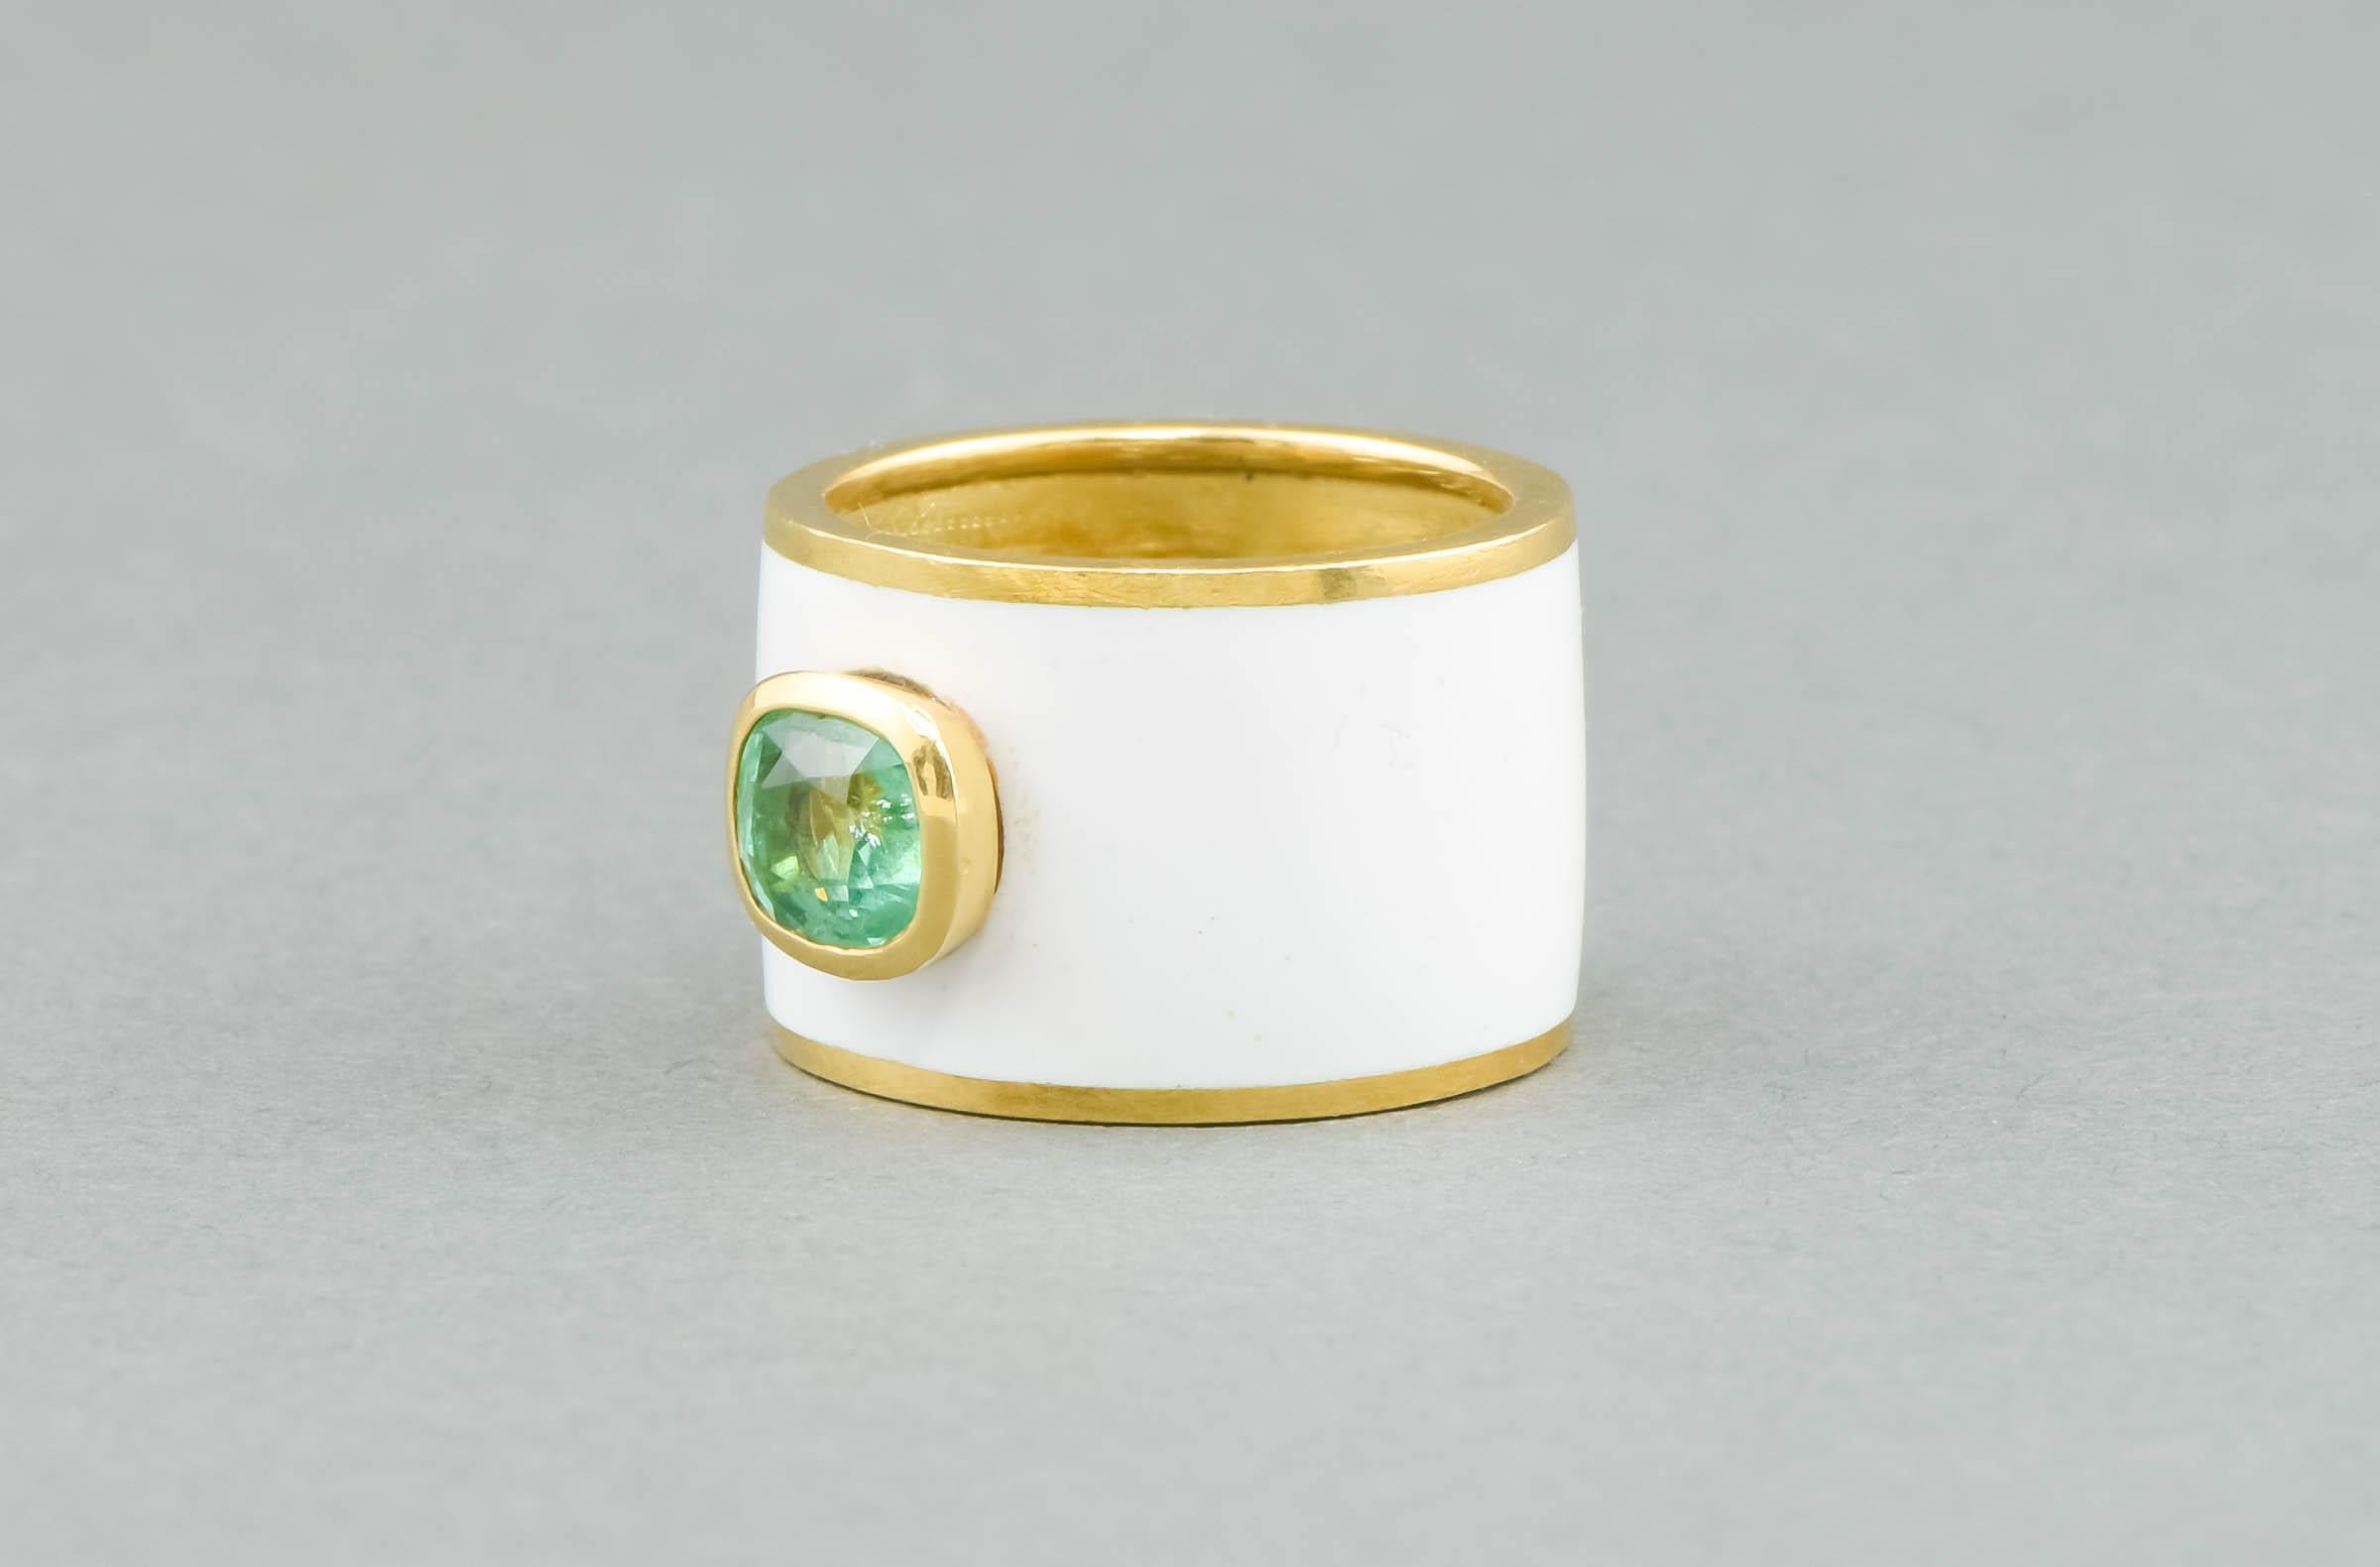 Emerald & White Enamel Wide Gold Band Ring In Good Condition For Sale In Danvers, MA